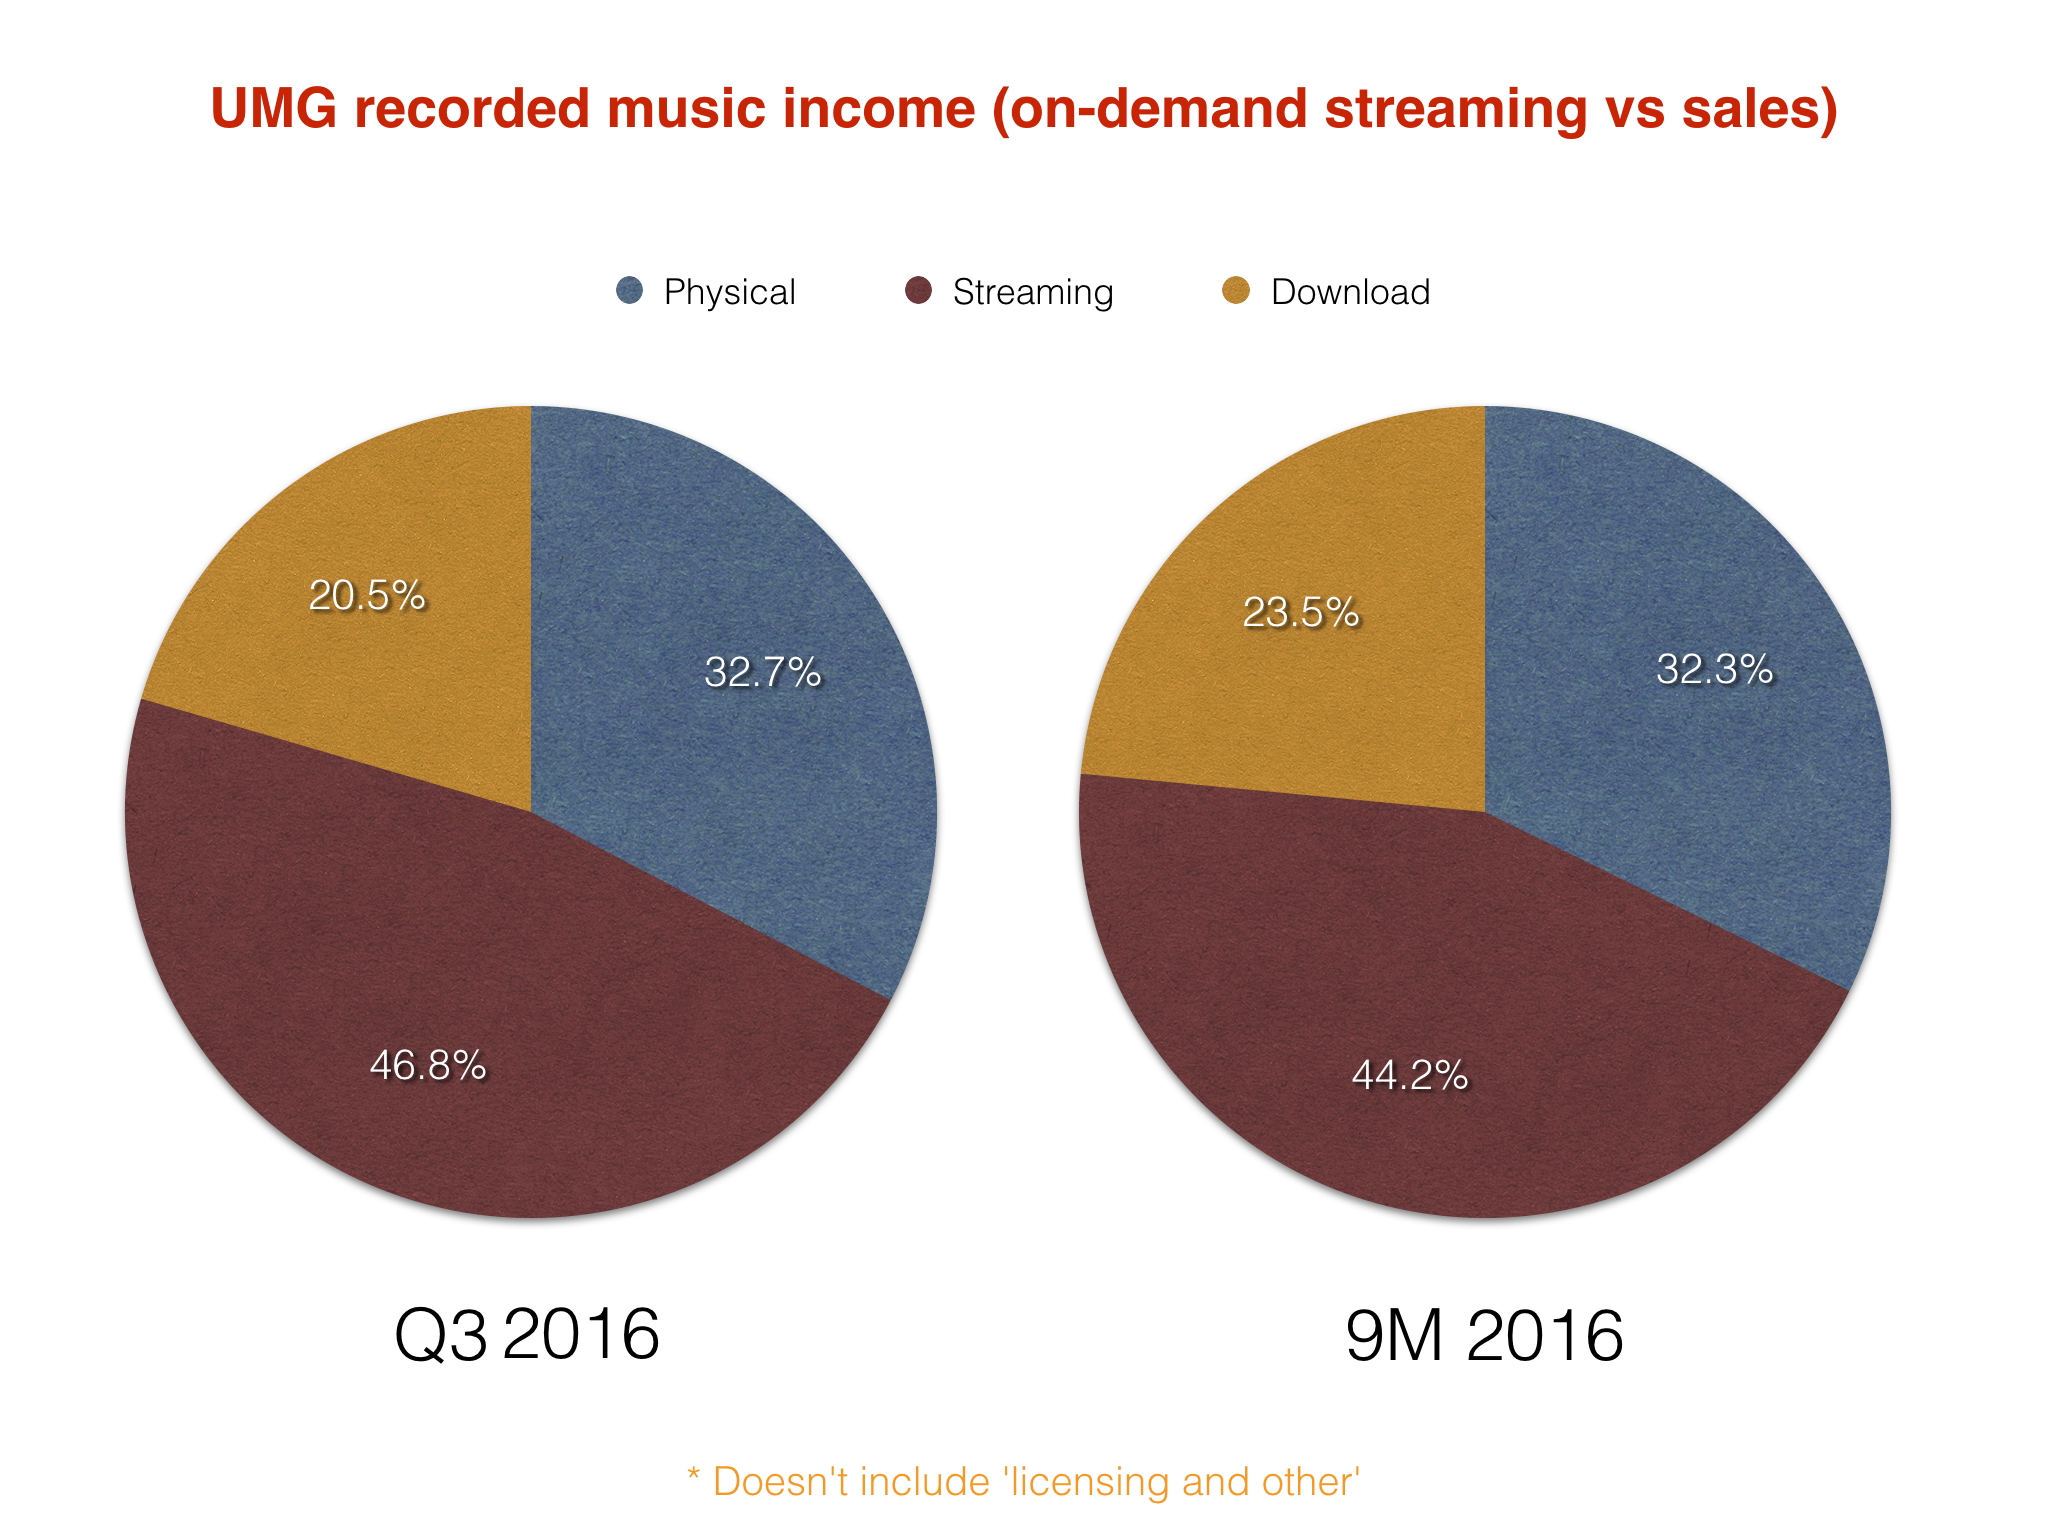 UMG already made a record $1 billion from music streaming this year